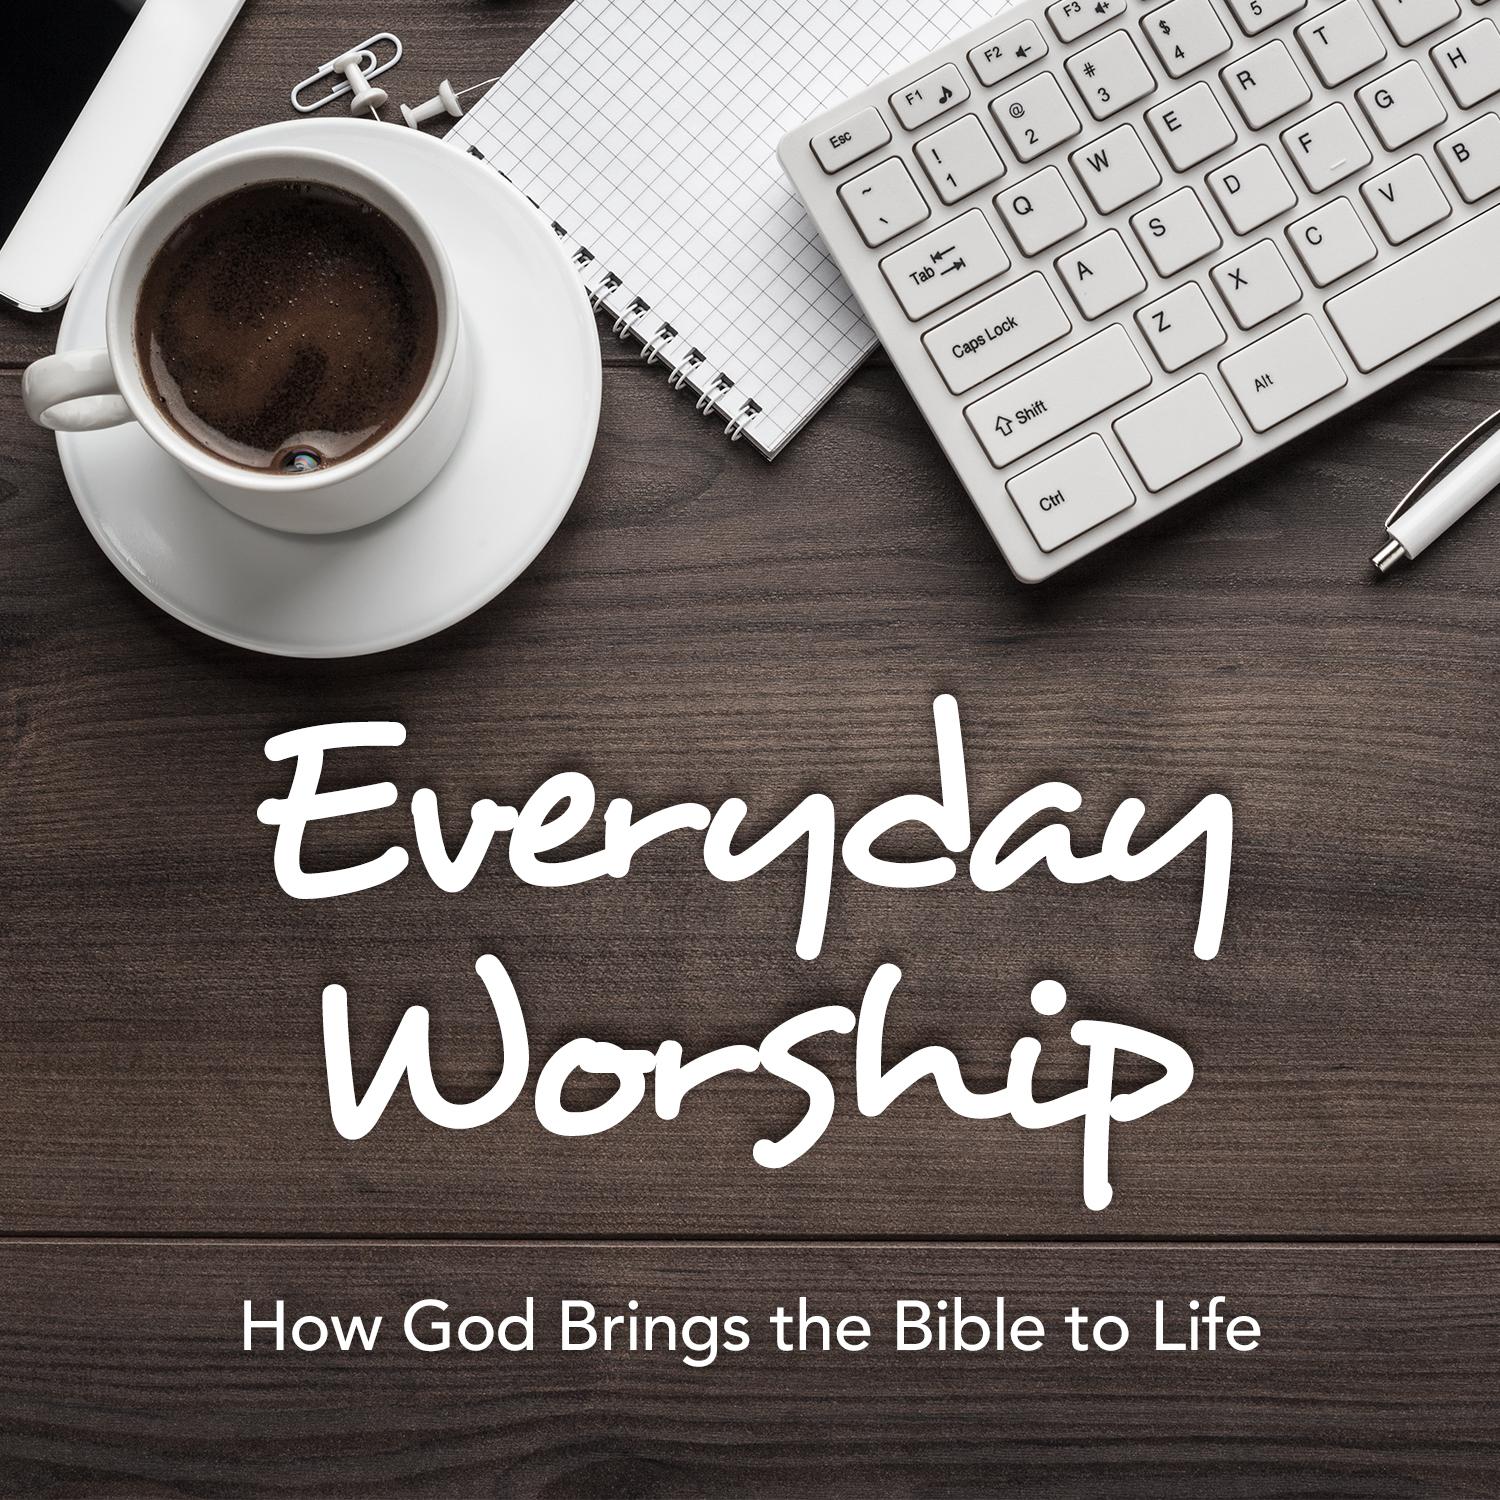 Featured image for What Makes Some Words Relevant? (Session 1: Everyday Worship)